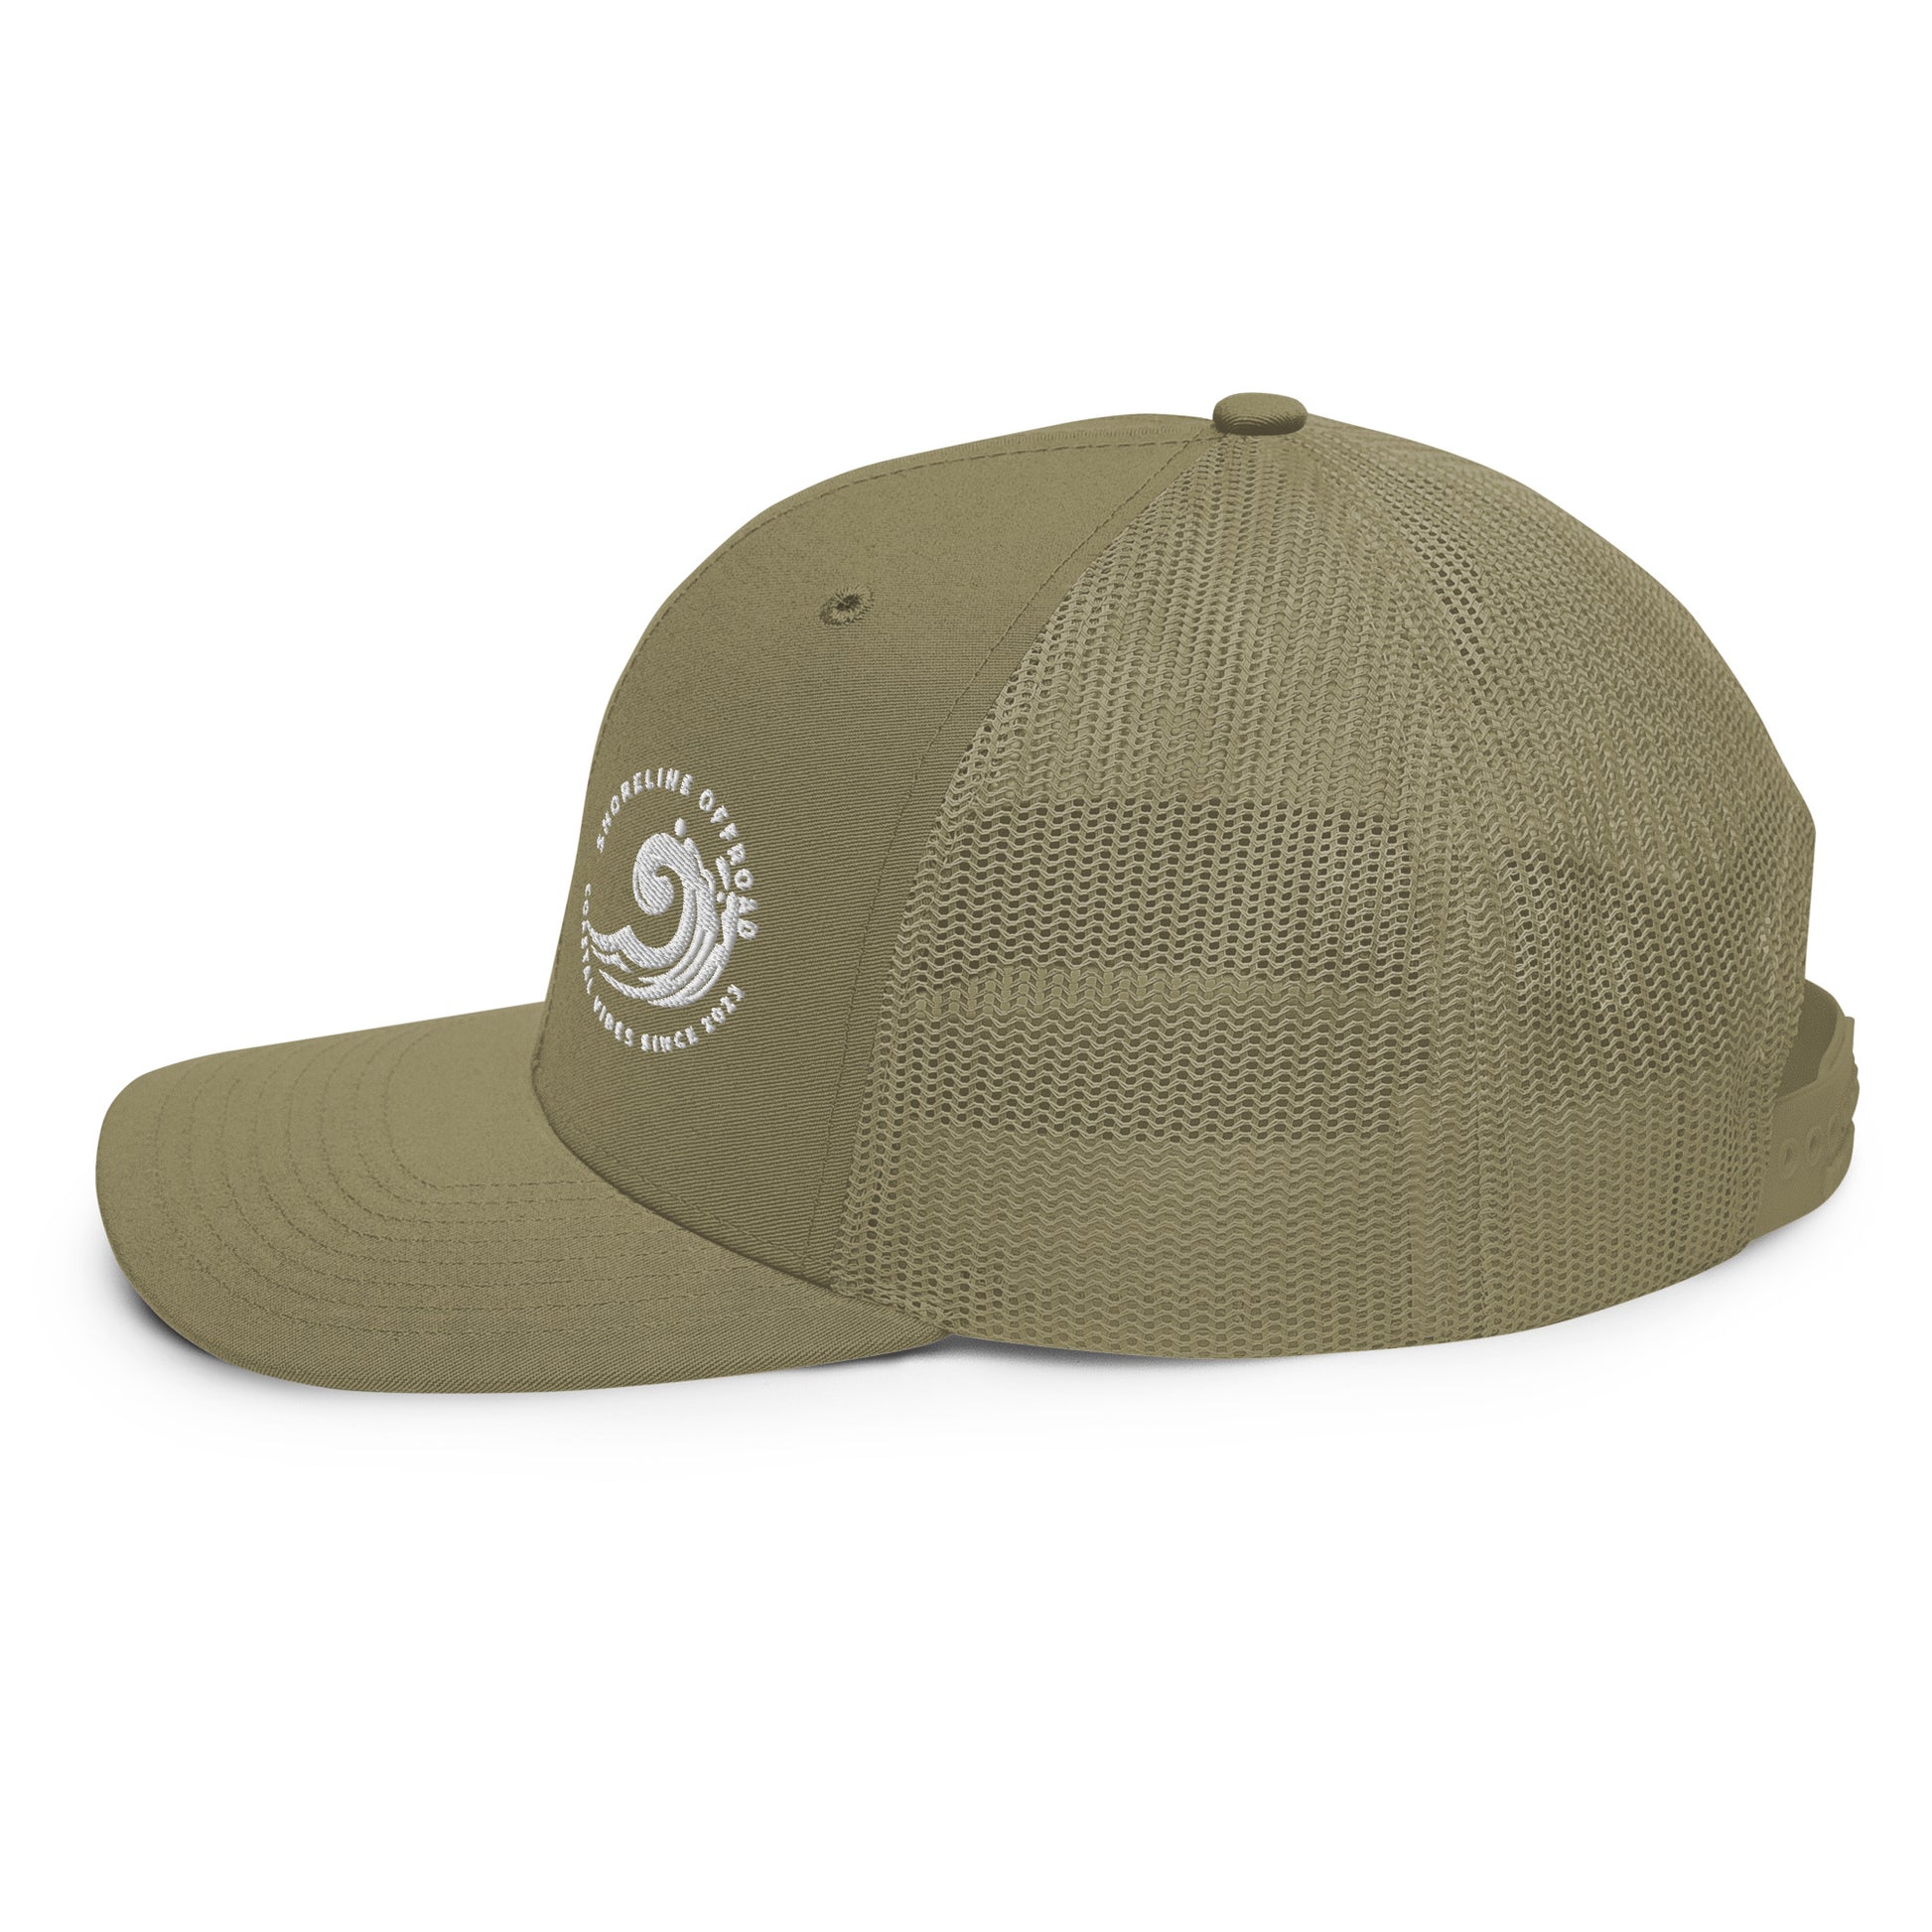 a green hat with a white logo on it